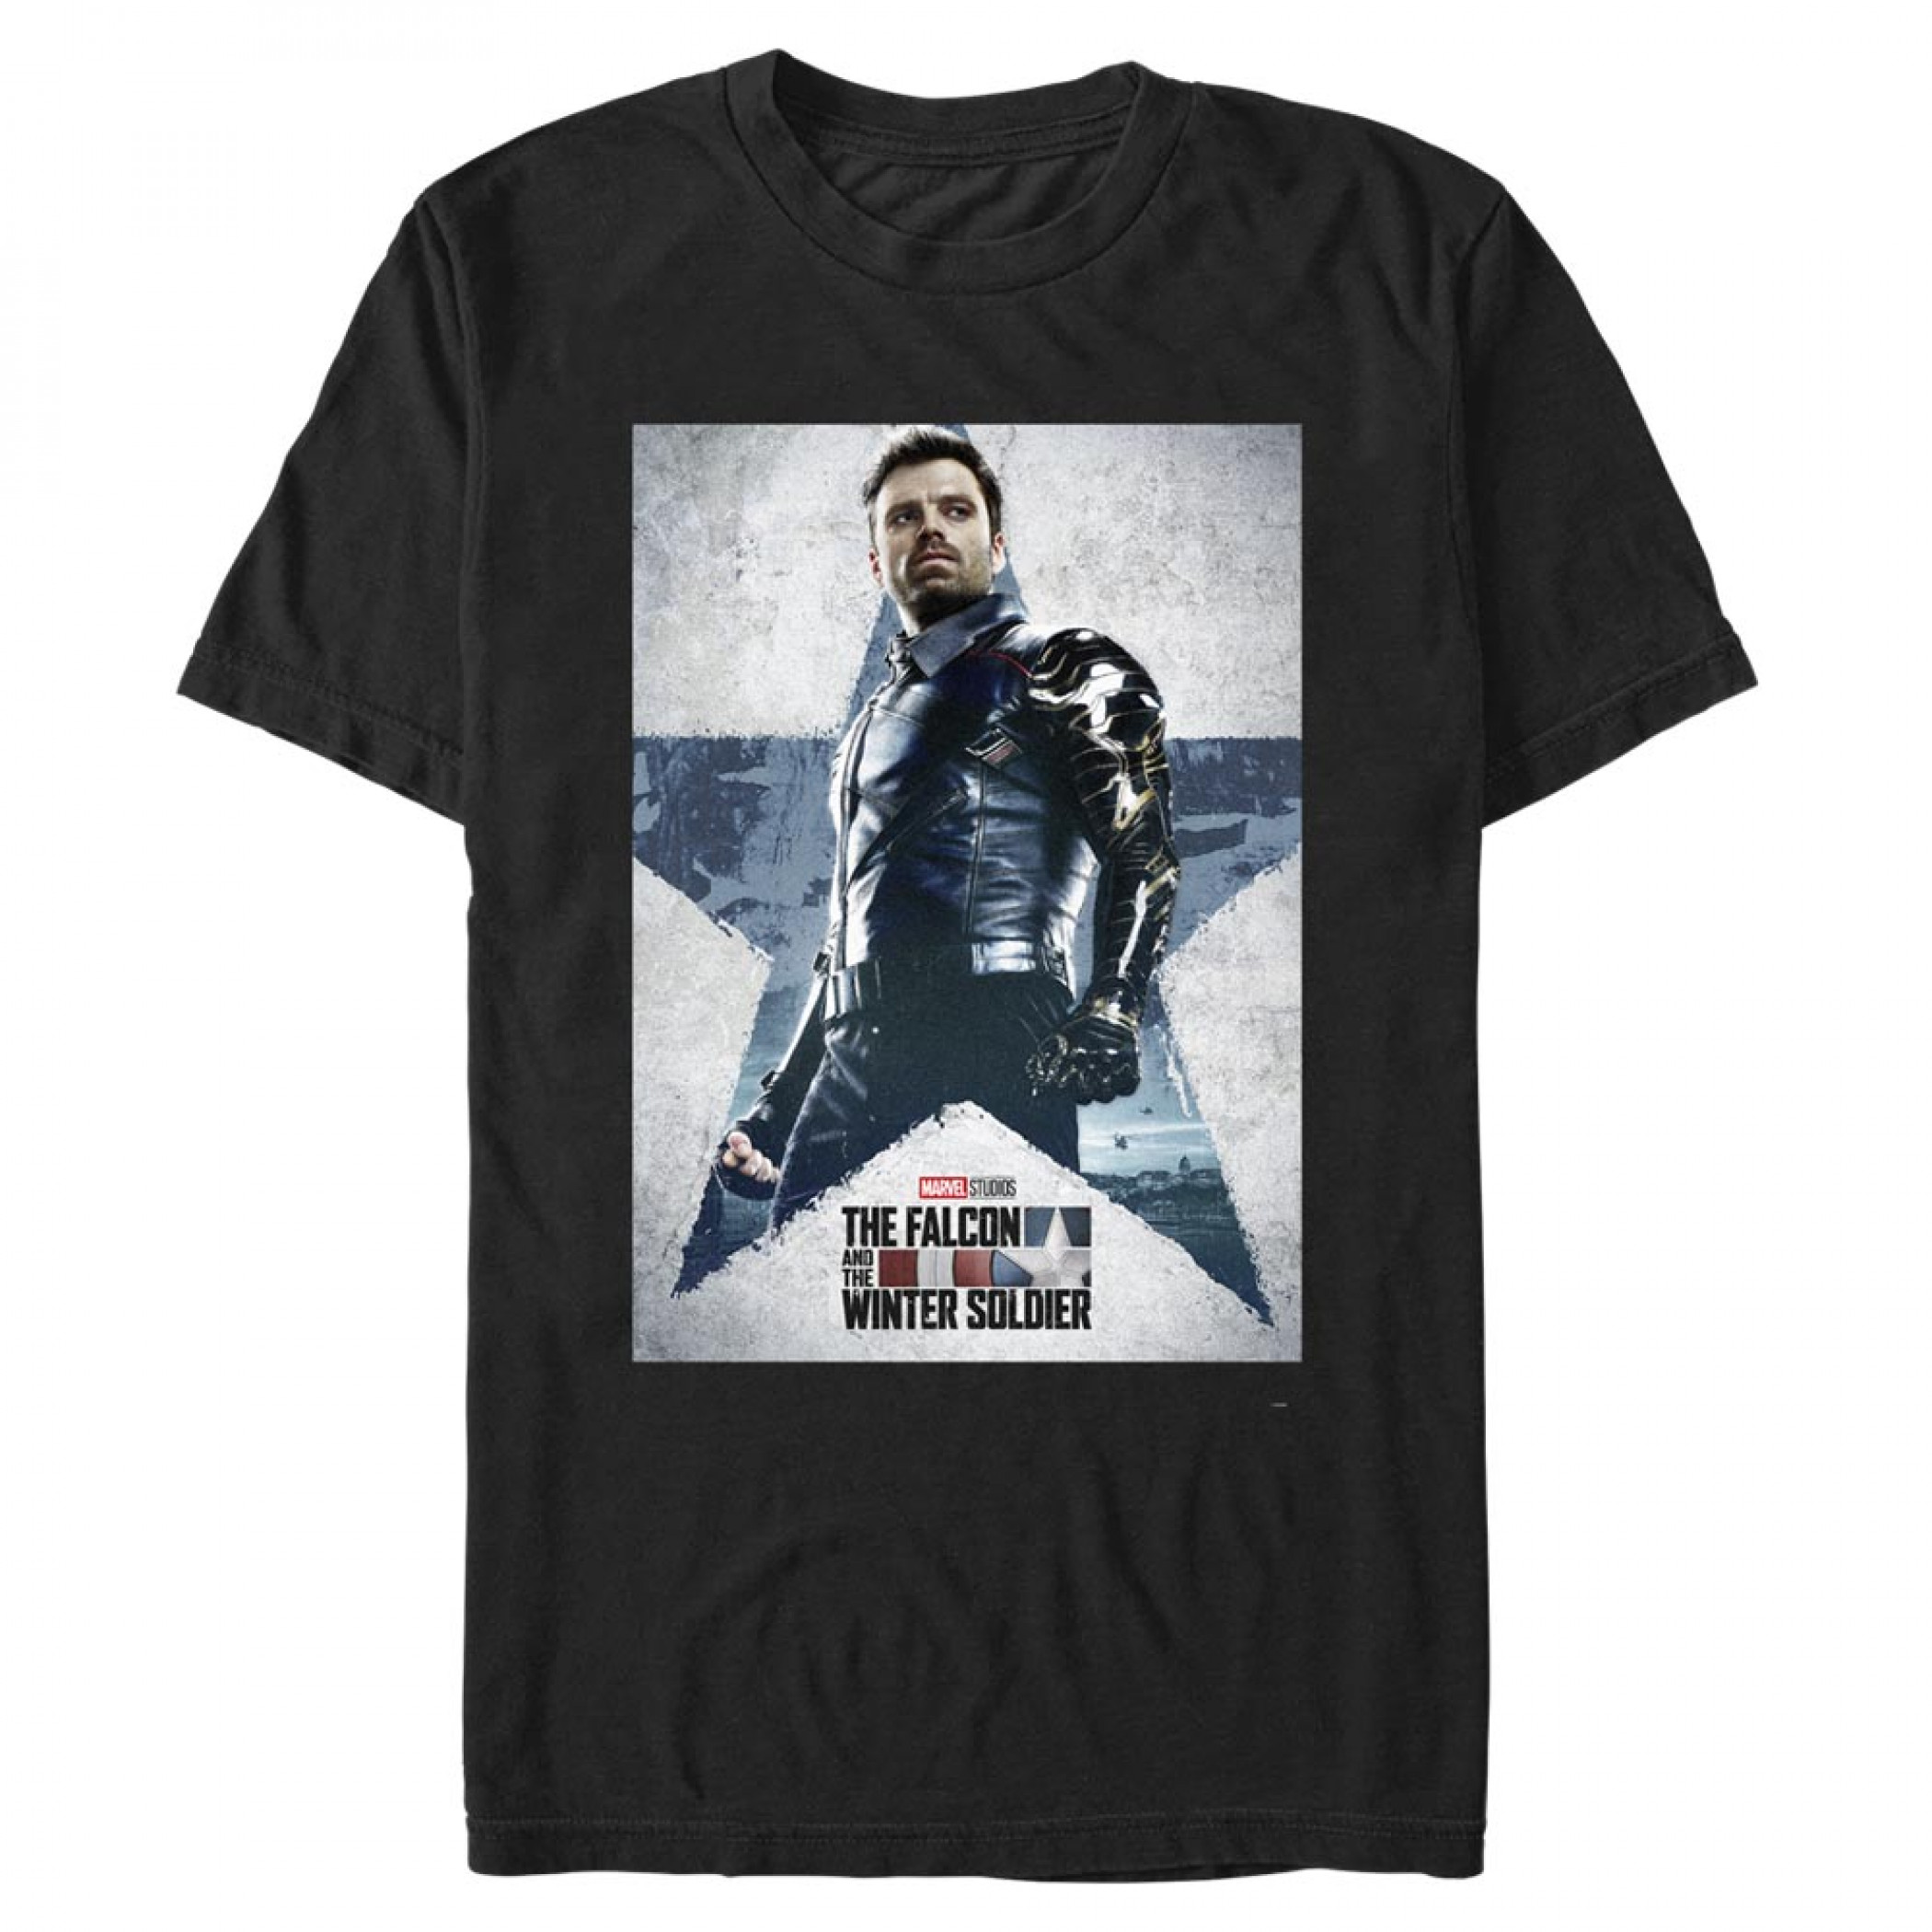 The Falcon and The Winter Soldier Poster T-Shirt